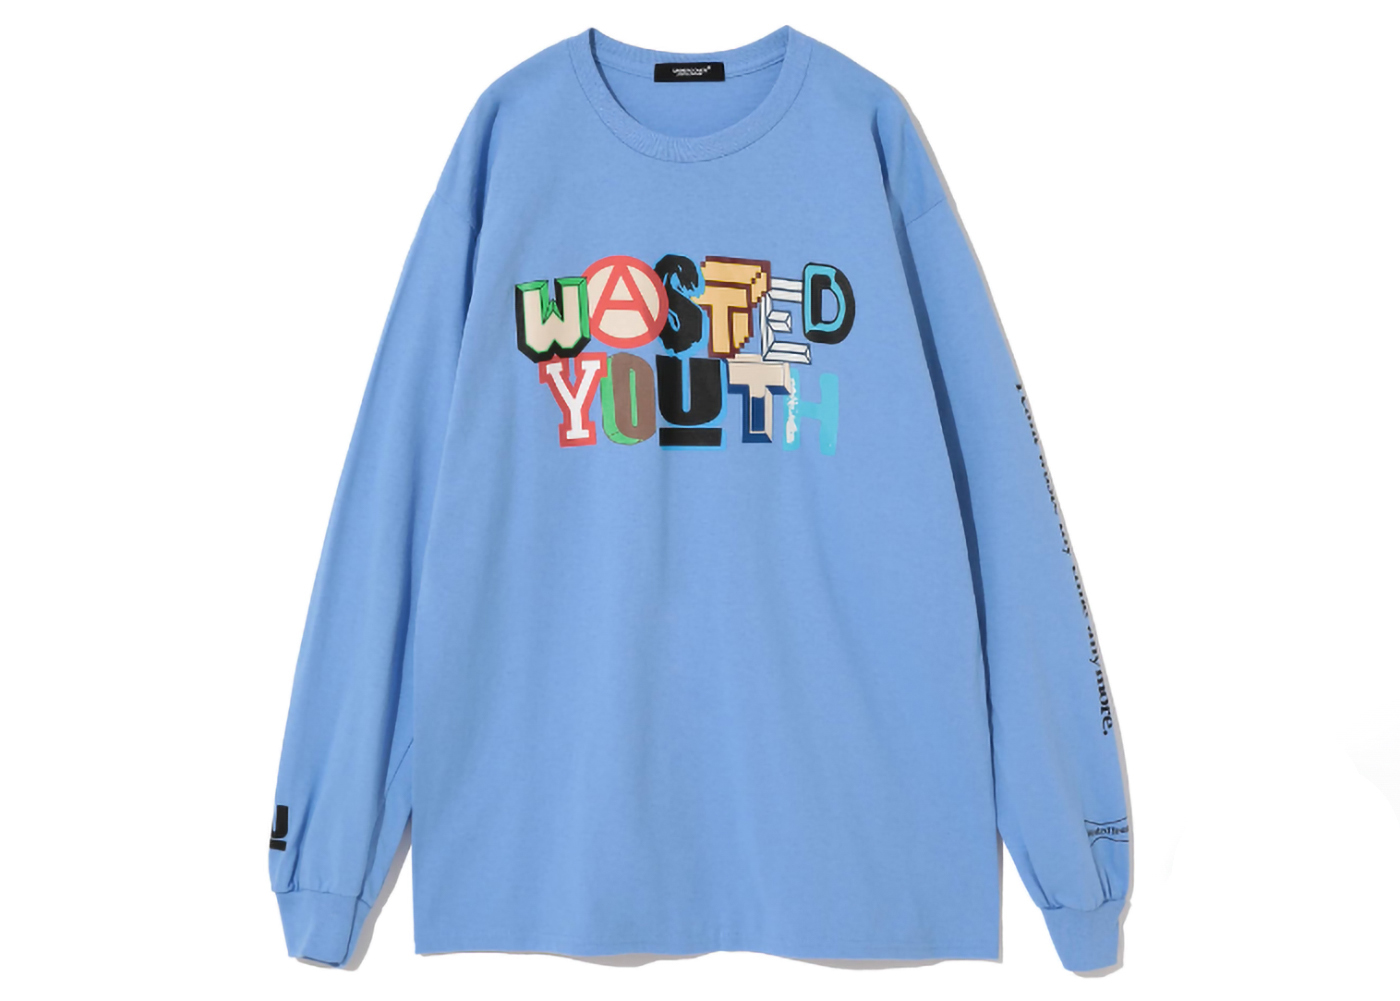 Undercover x Verdy Wasted Youth L/S T-Shirt Light Blue Men's